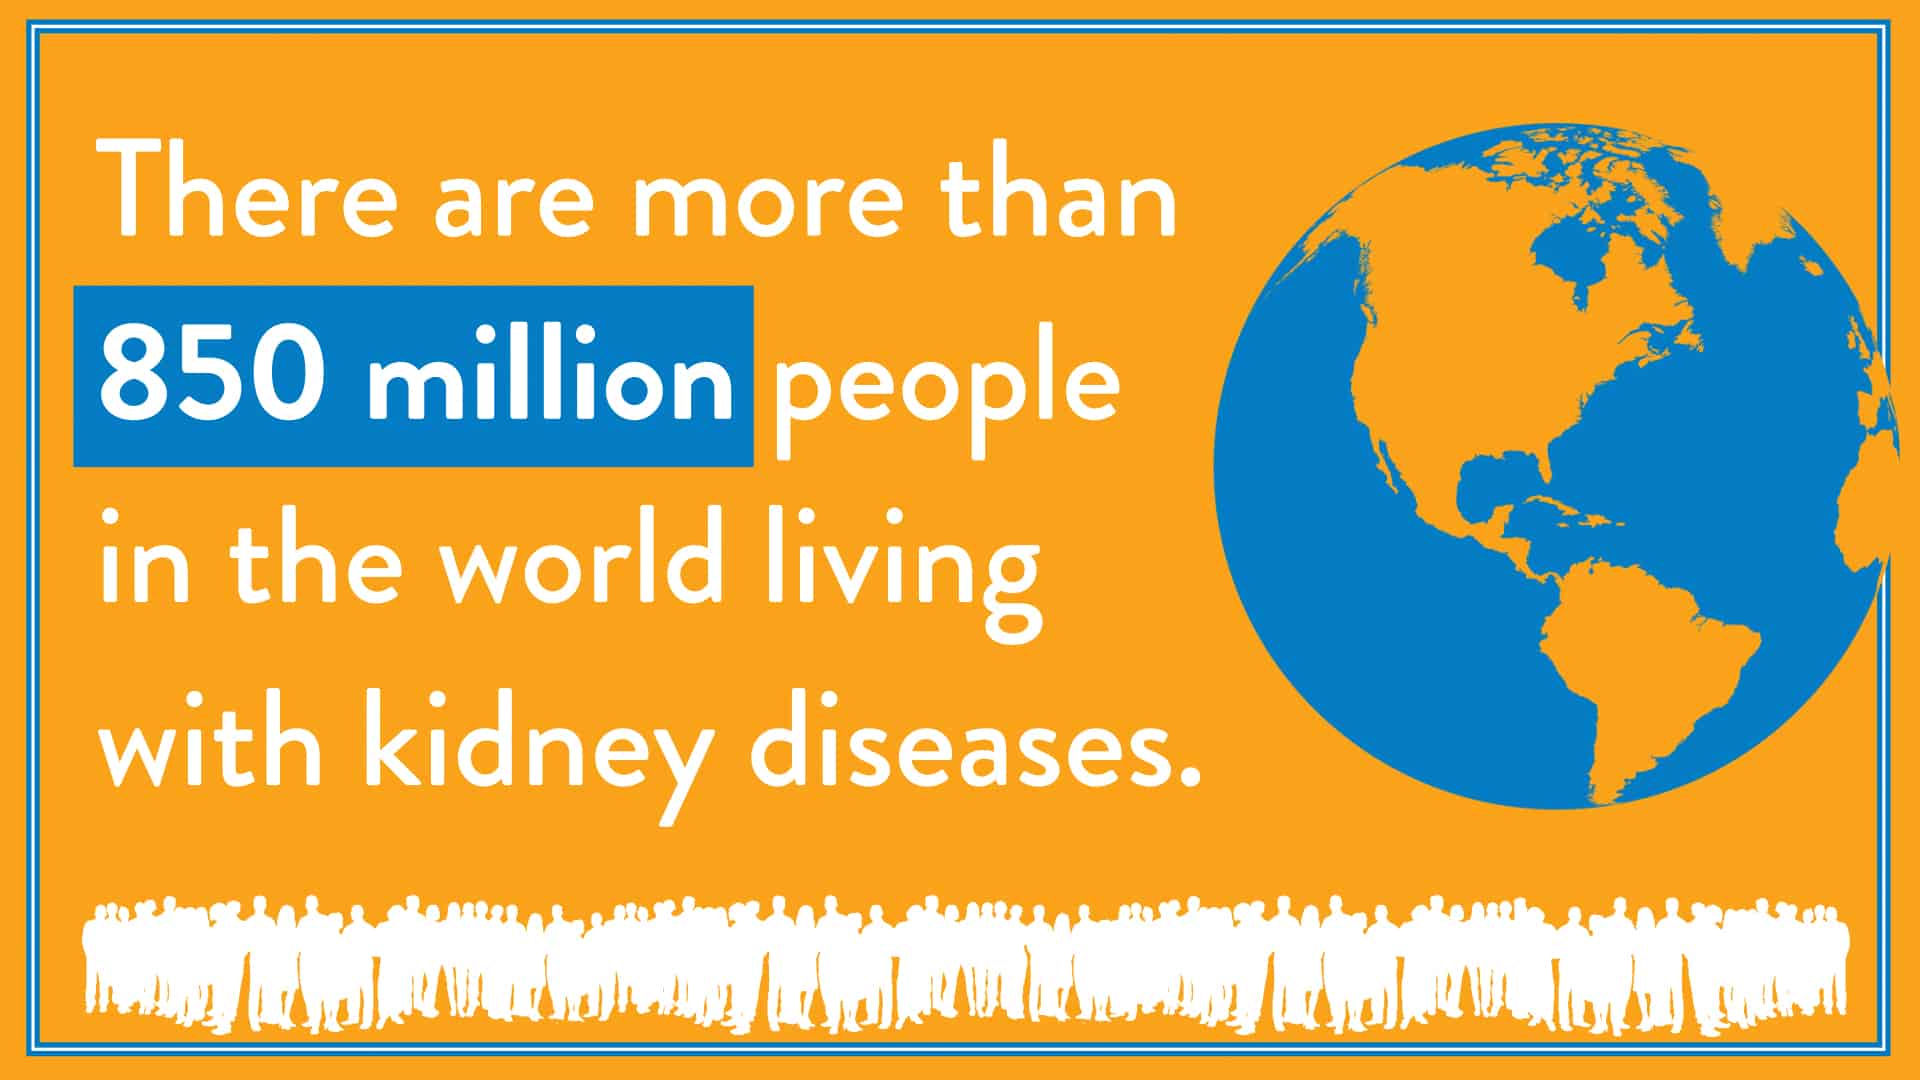 There are more than 850 people in the world living with kidney diseases.